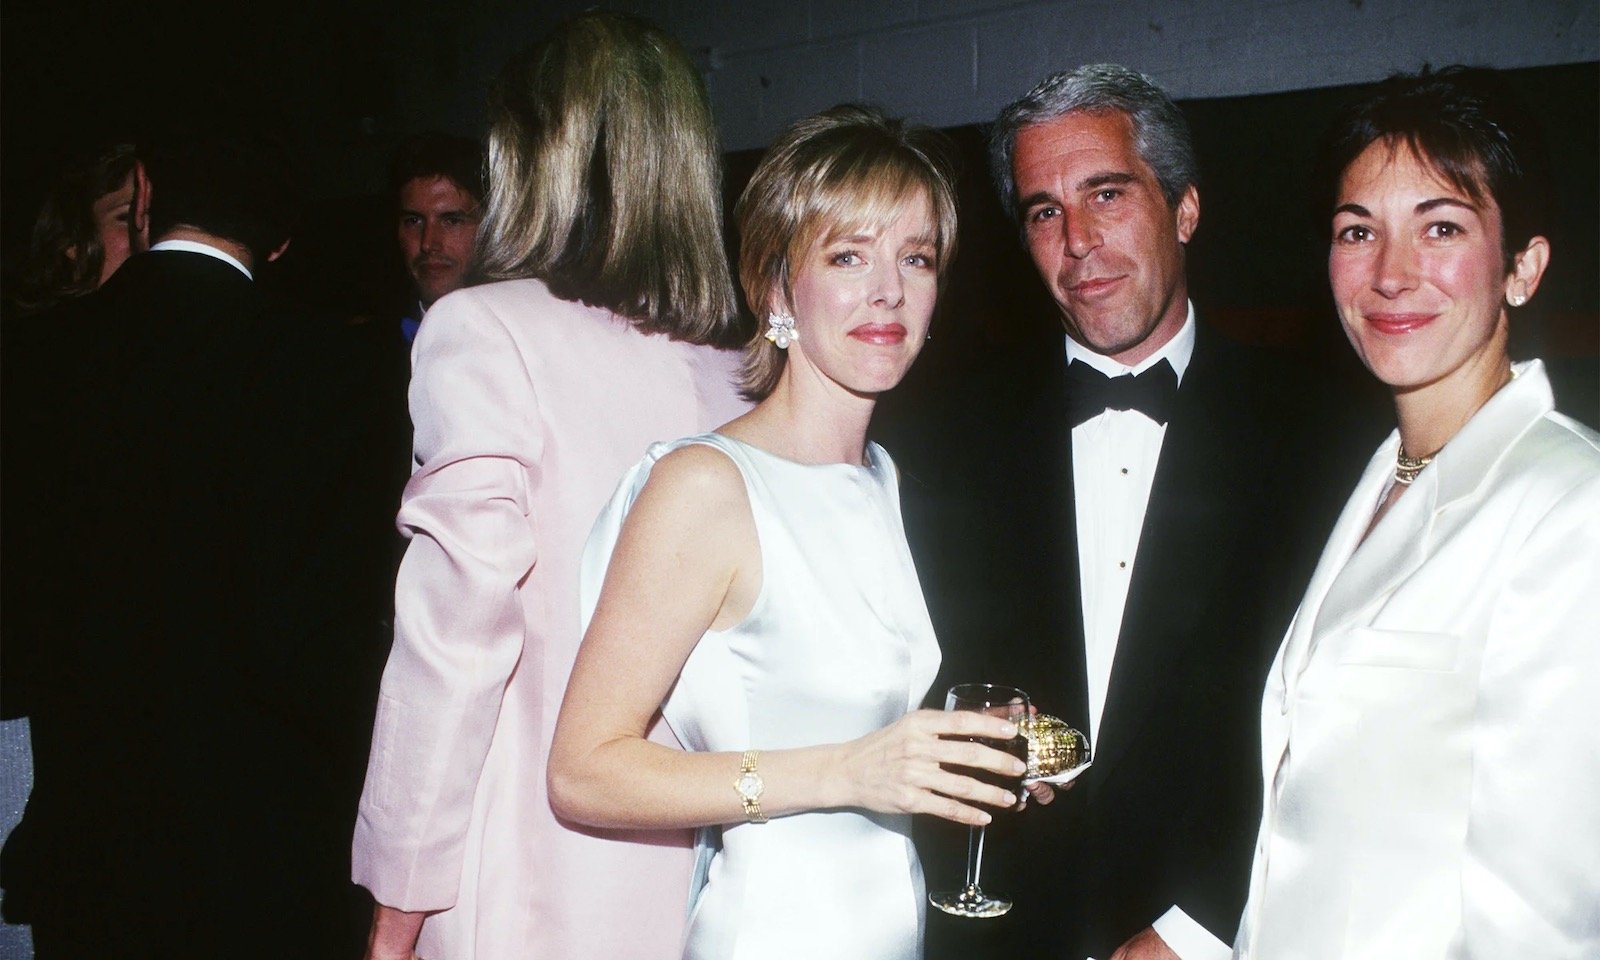 Prince Andrew, Duke of York, spent a lot of time over the past 20+ years alongside socialite Ghislaine Maxwell. But what was their relationship really like?